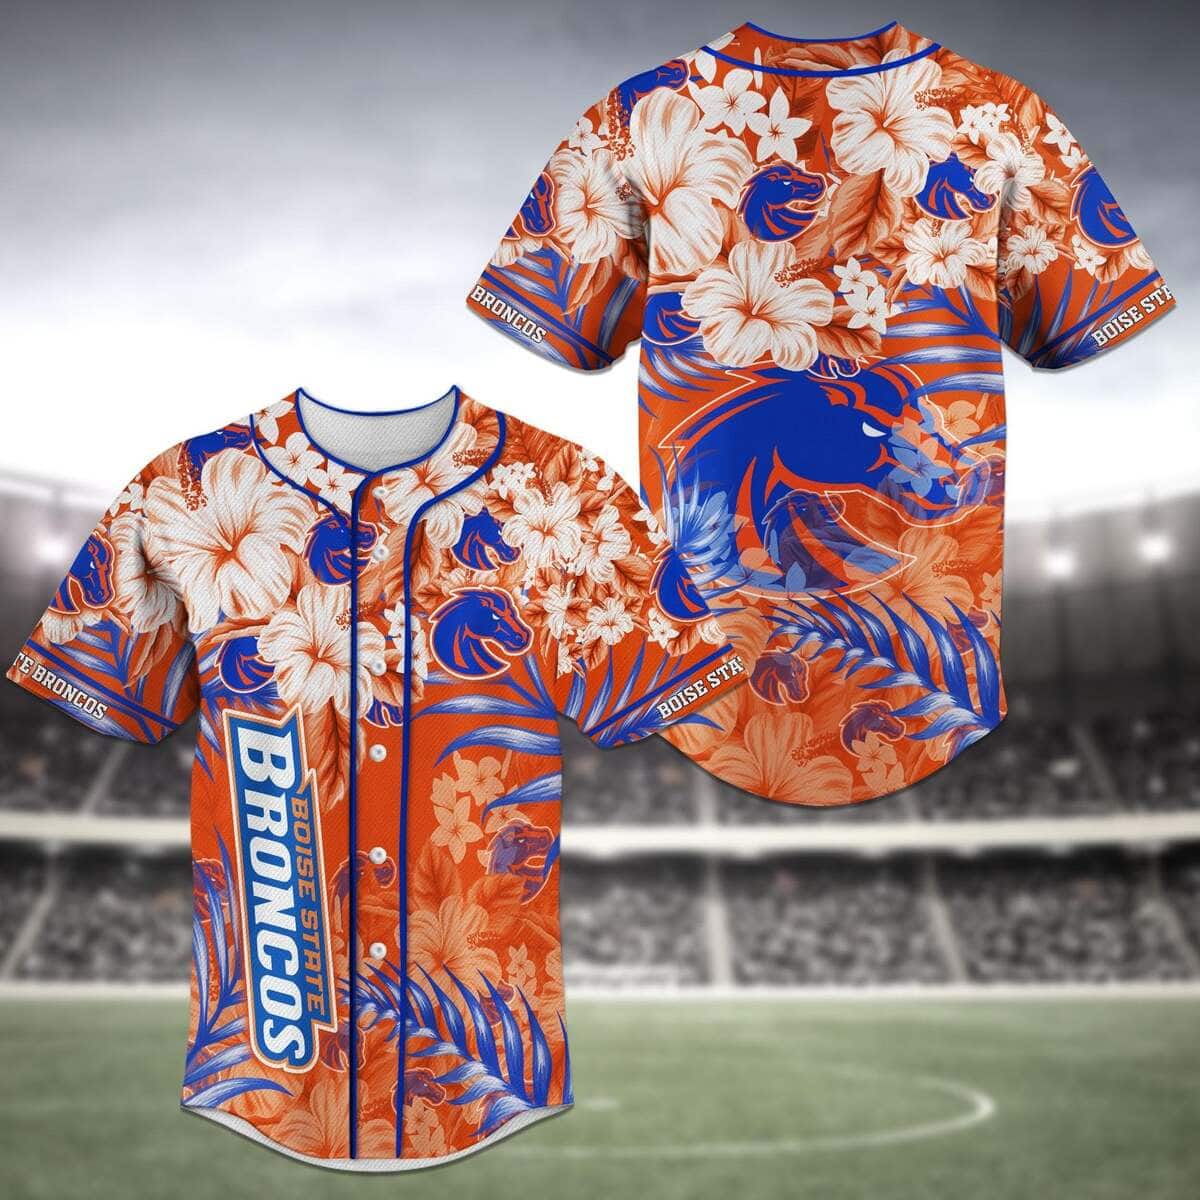 Aloha NCAA Boise State Broncos Baseball Jersey Tropical Flower Gift For Father-In-Law